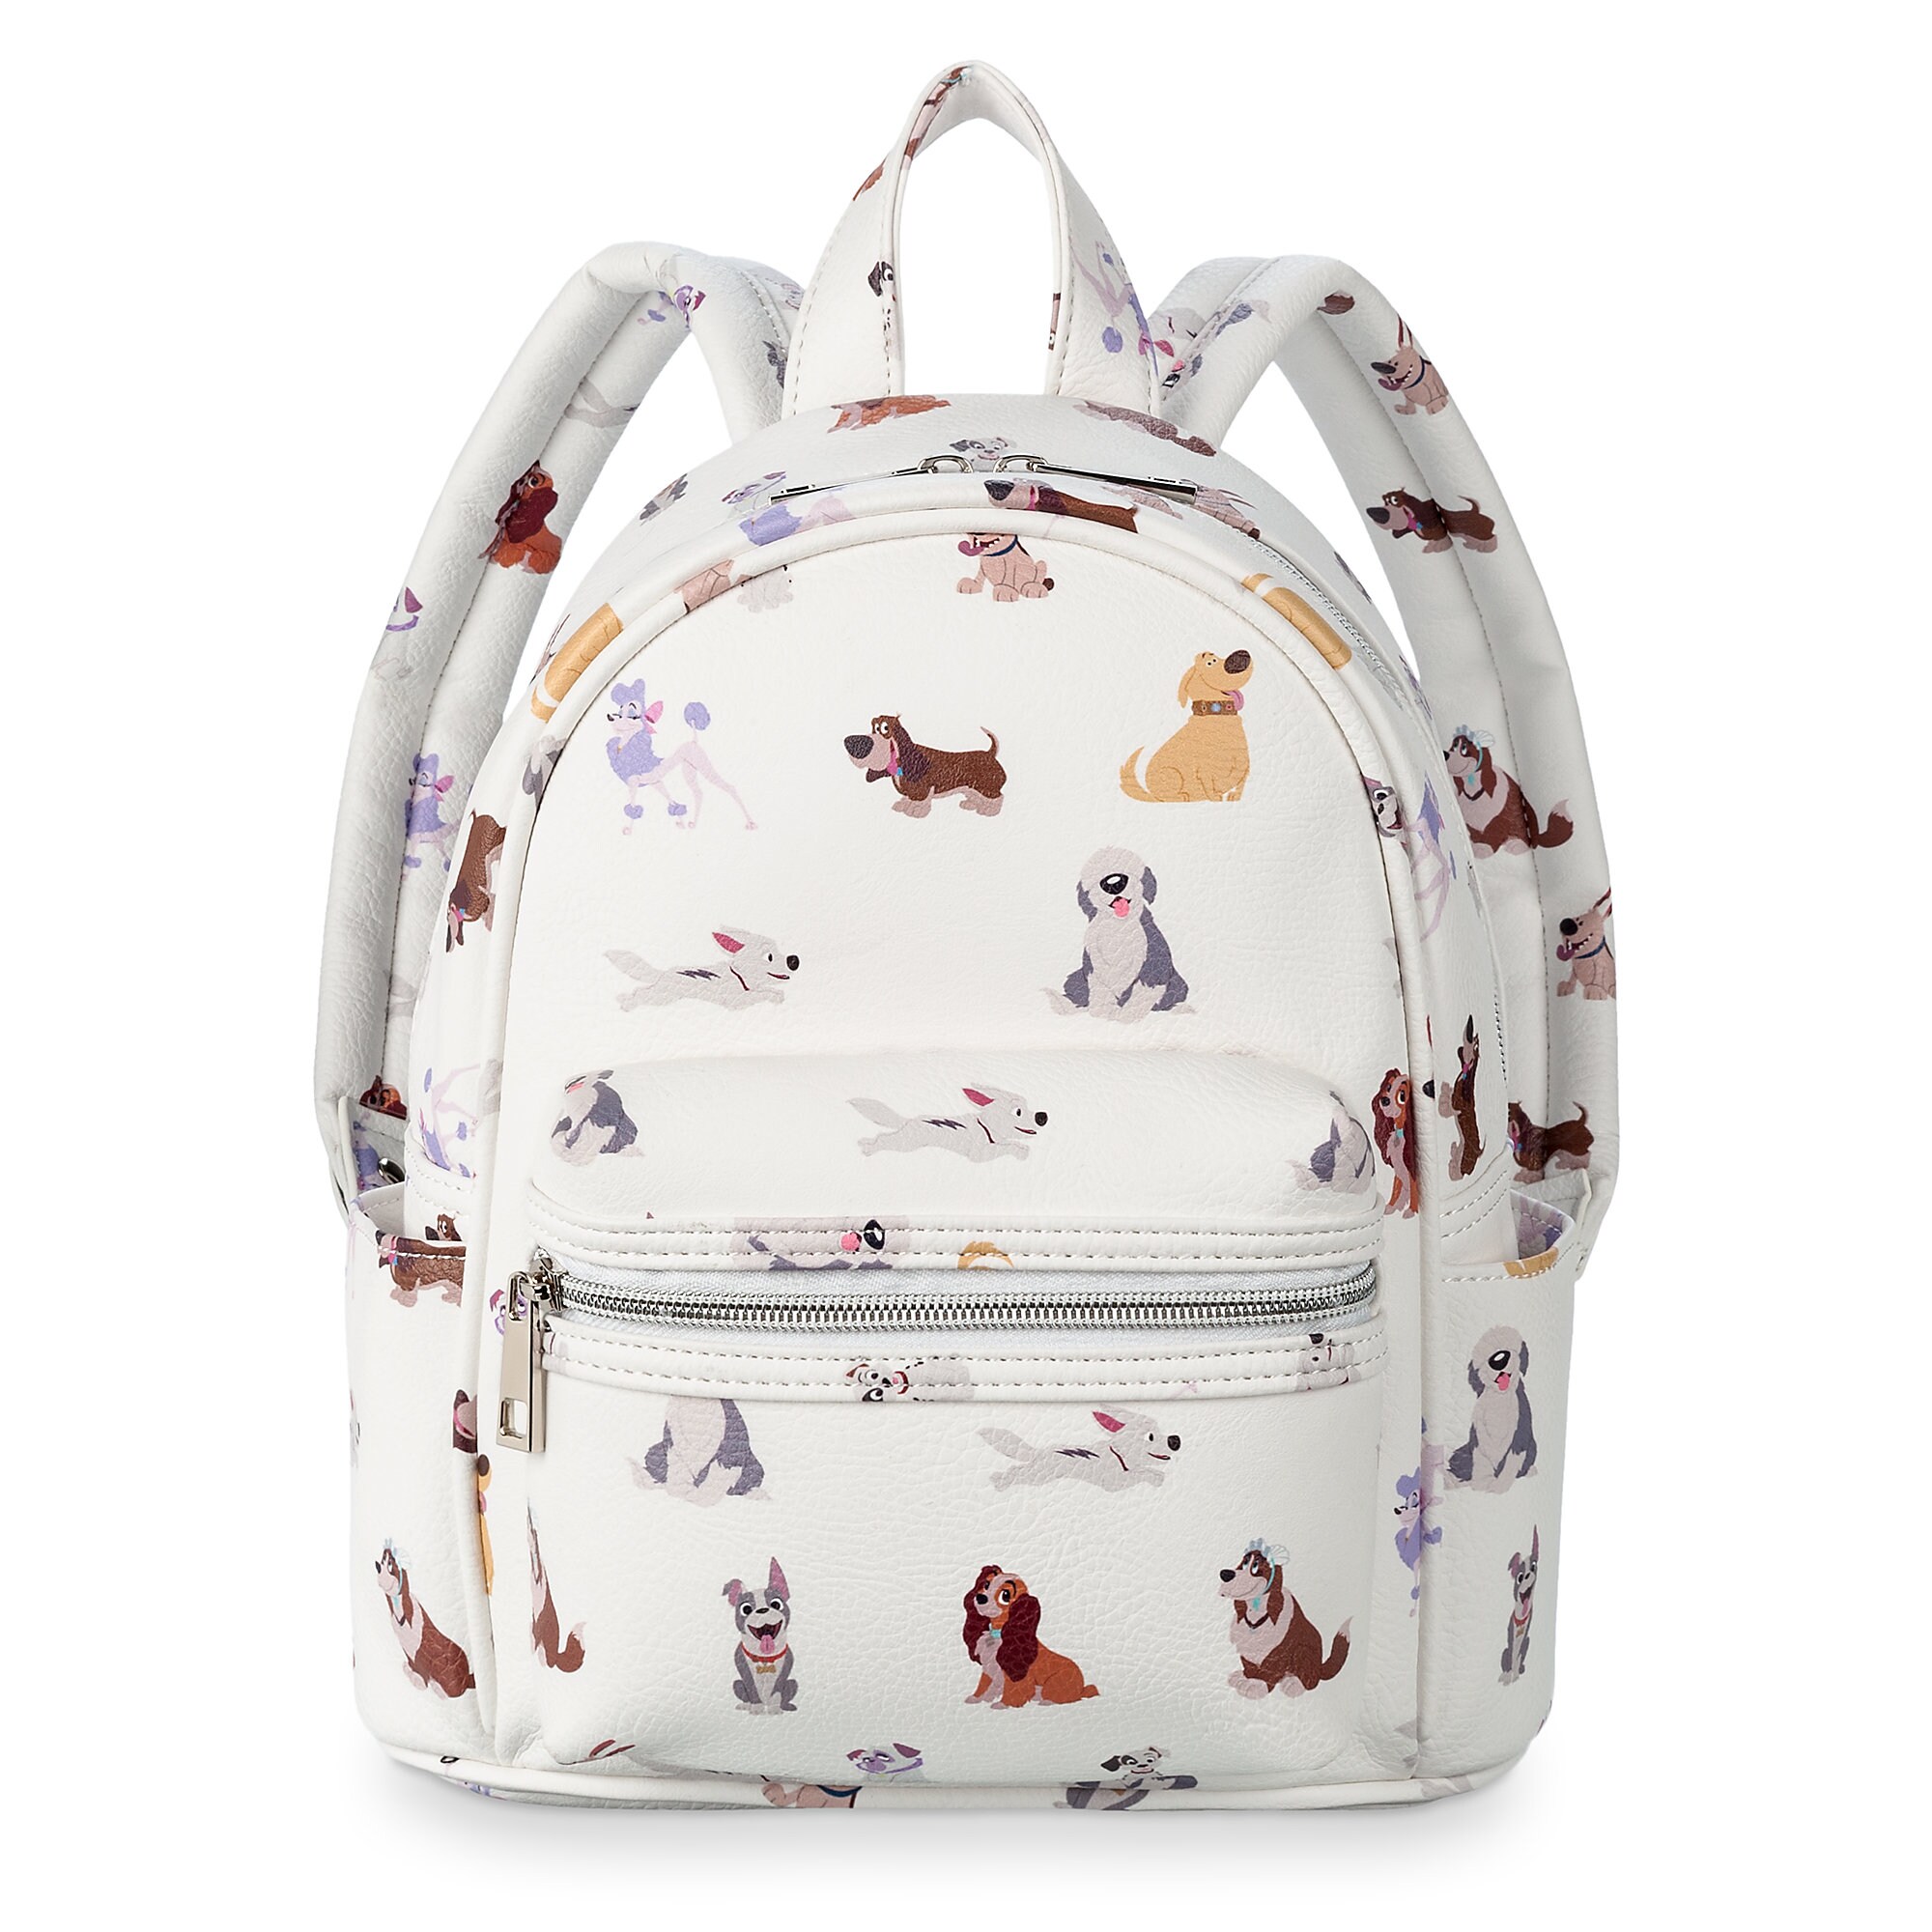 Disney Dogs Mini Backpack Oh My Disney has hit the